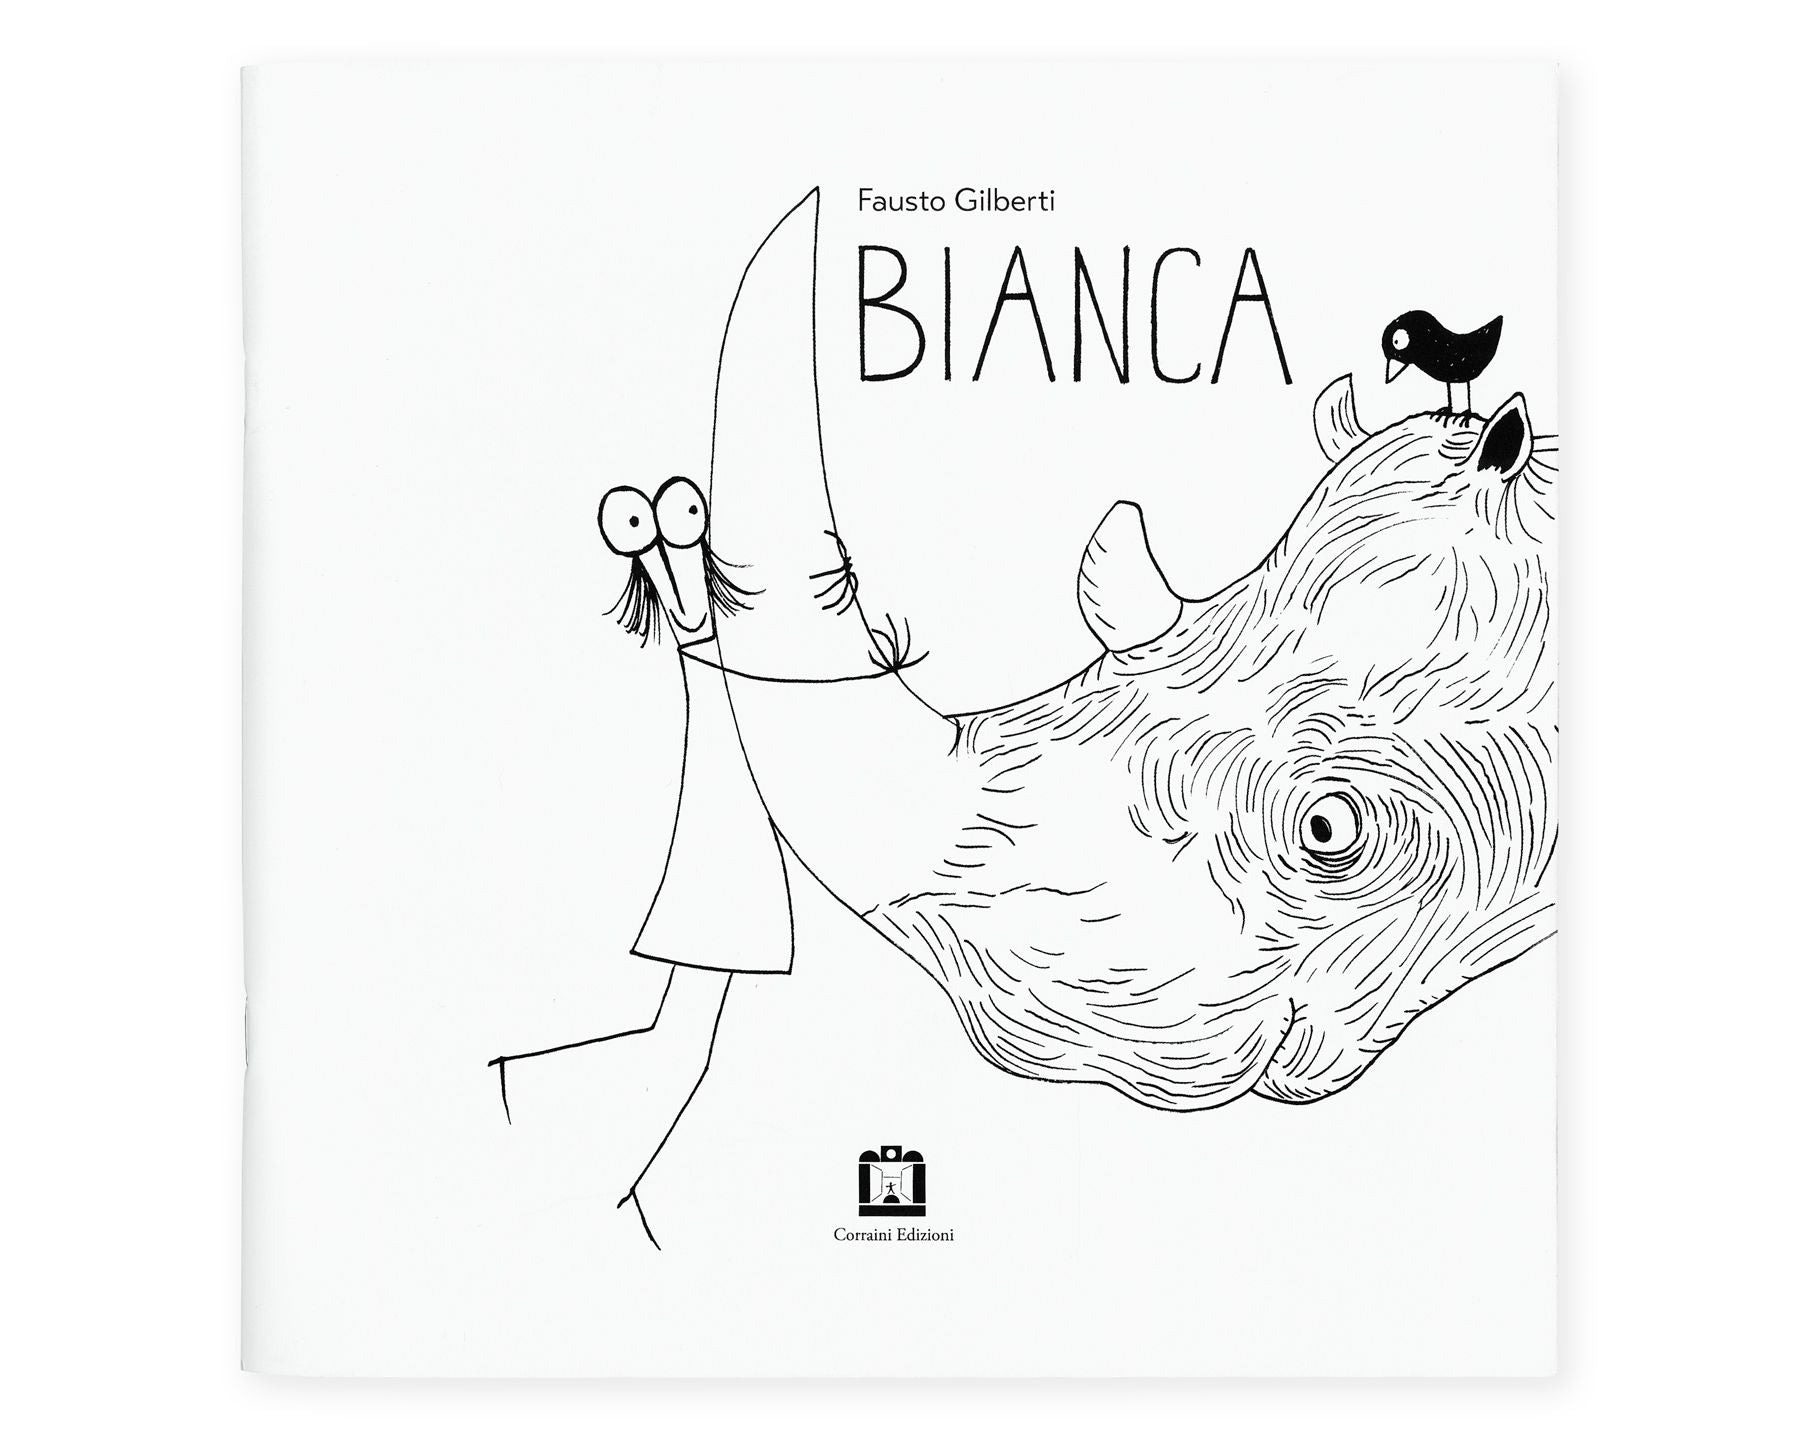 Bianca cover